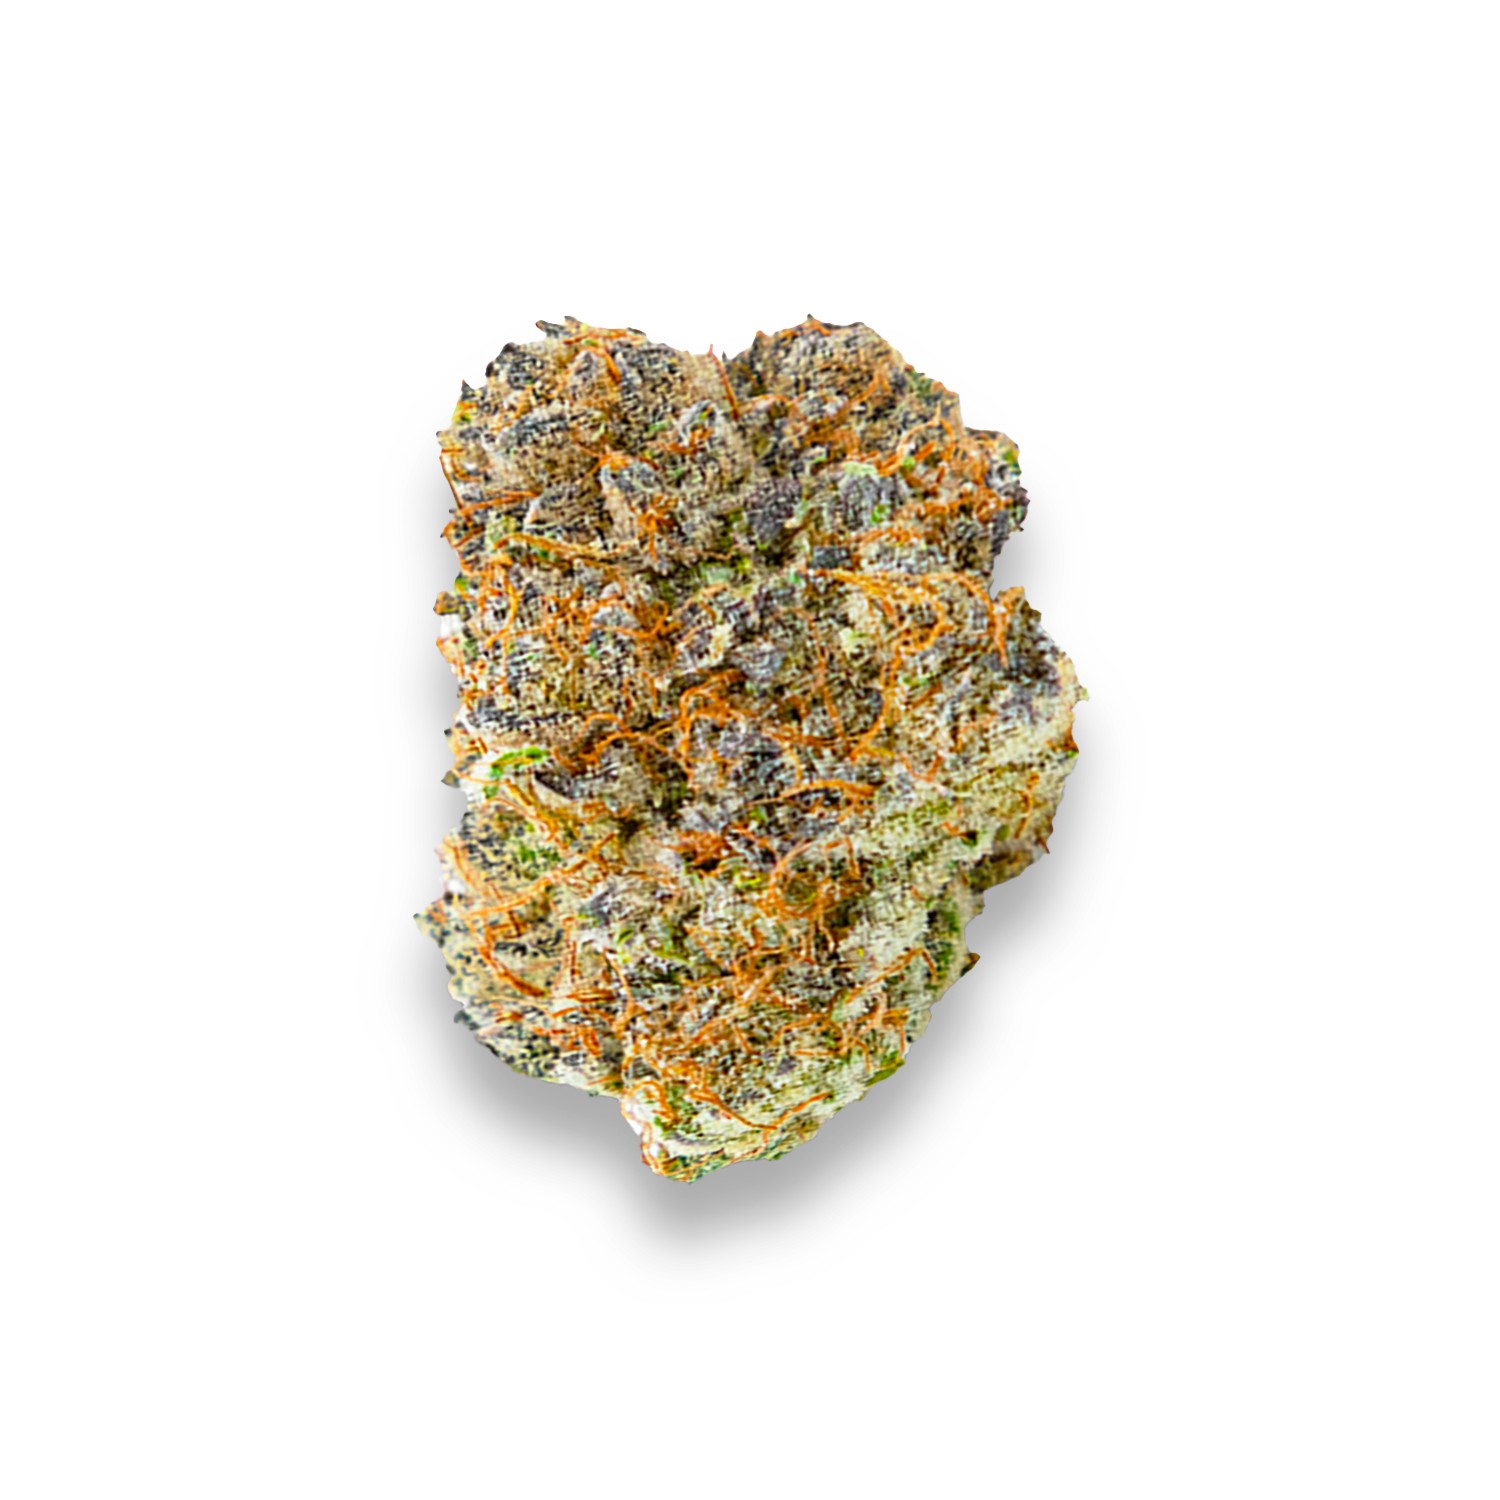 snowball strain review